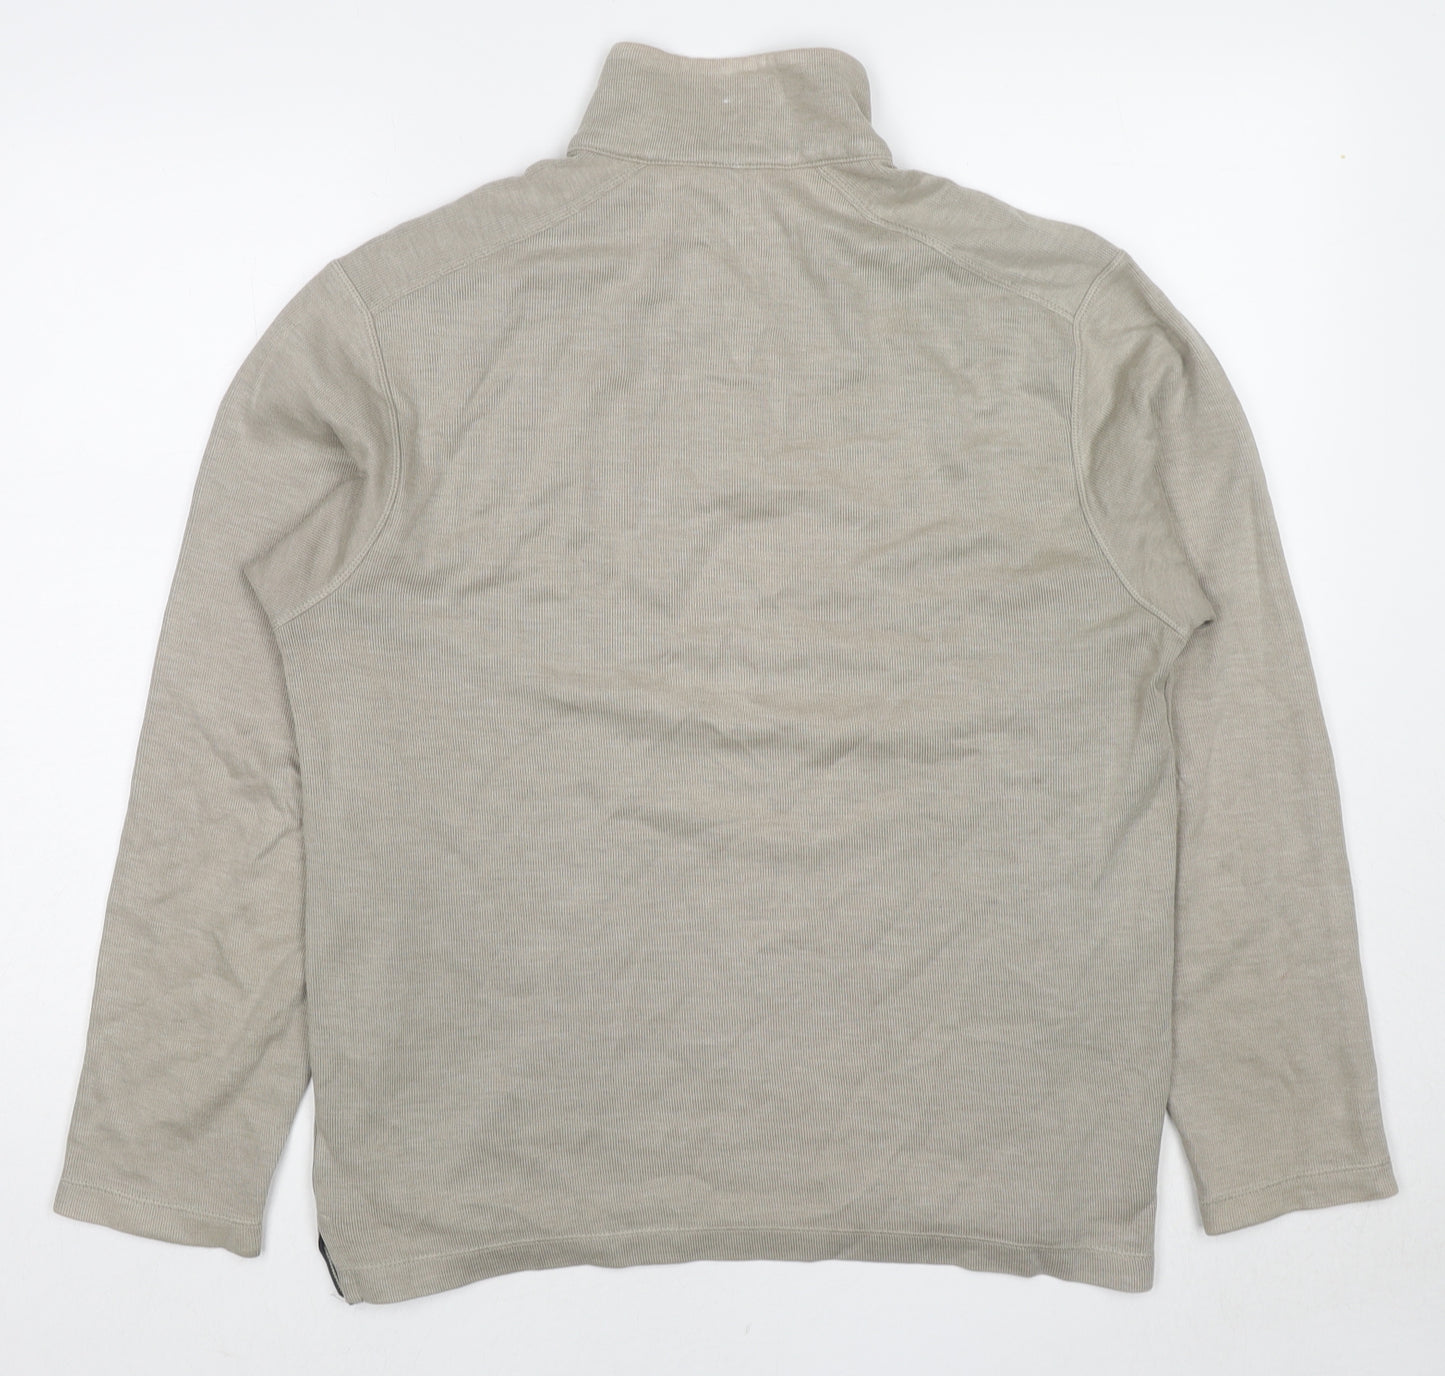 Marks and Spencer Mens Beige Cotton Pullover Sweatshirt Size S